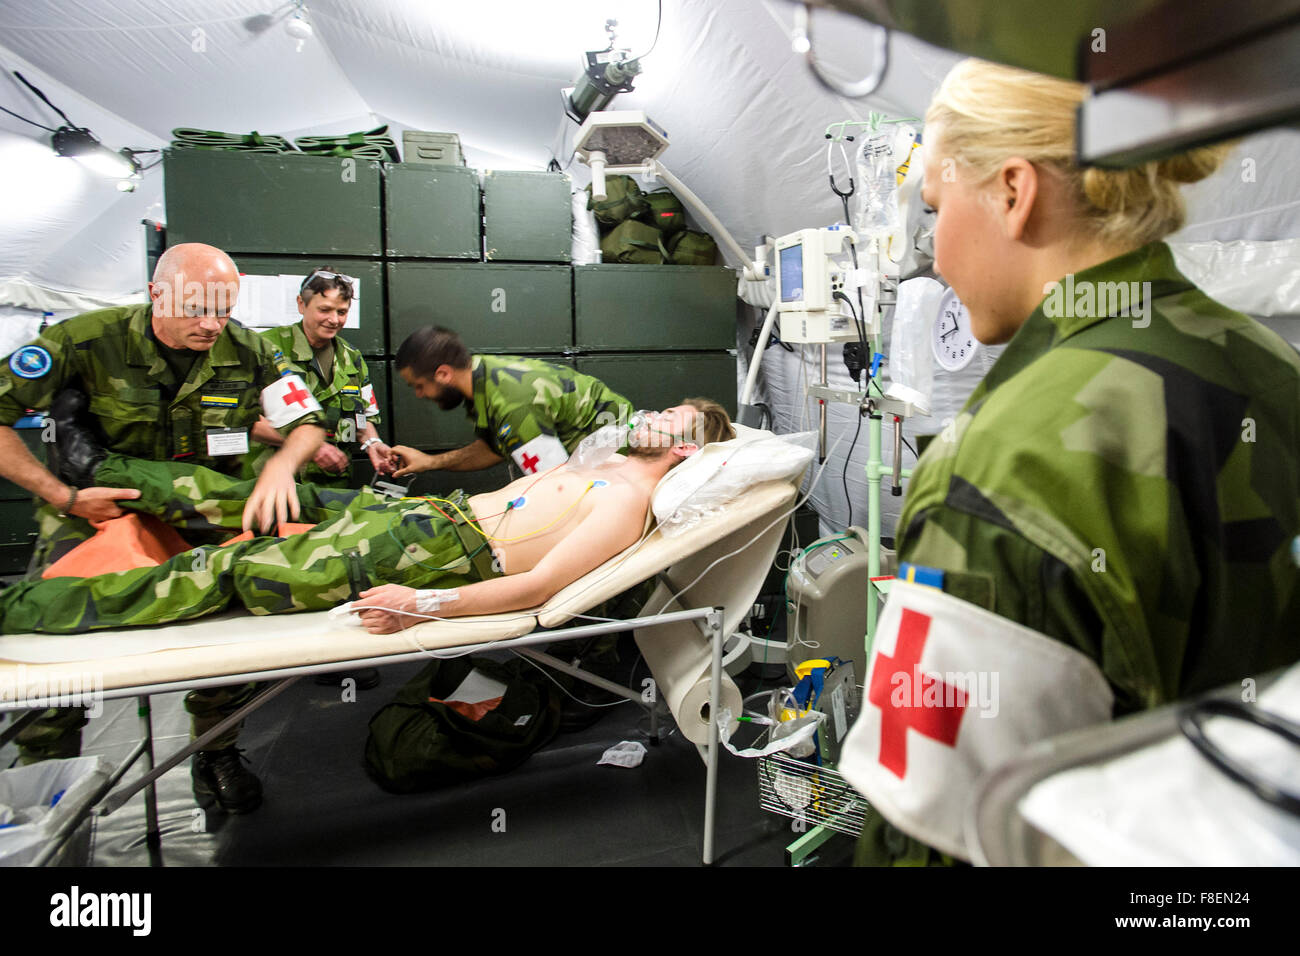 Hradec Kralove, Czech Republic. 11th June, 2015. The multinational military medical exercise Vigorous Warrior 2015, in which 350 military medics from 15 countries practicing mutual cooperation continues in Hradec Kralove, Czech Republic, June 11, 2015. © David Tanecek/CTK Photo/Alamy Live News Stock Photo